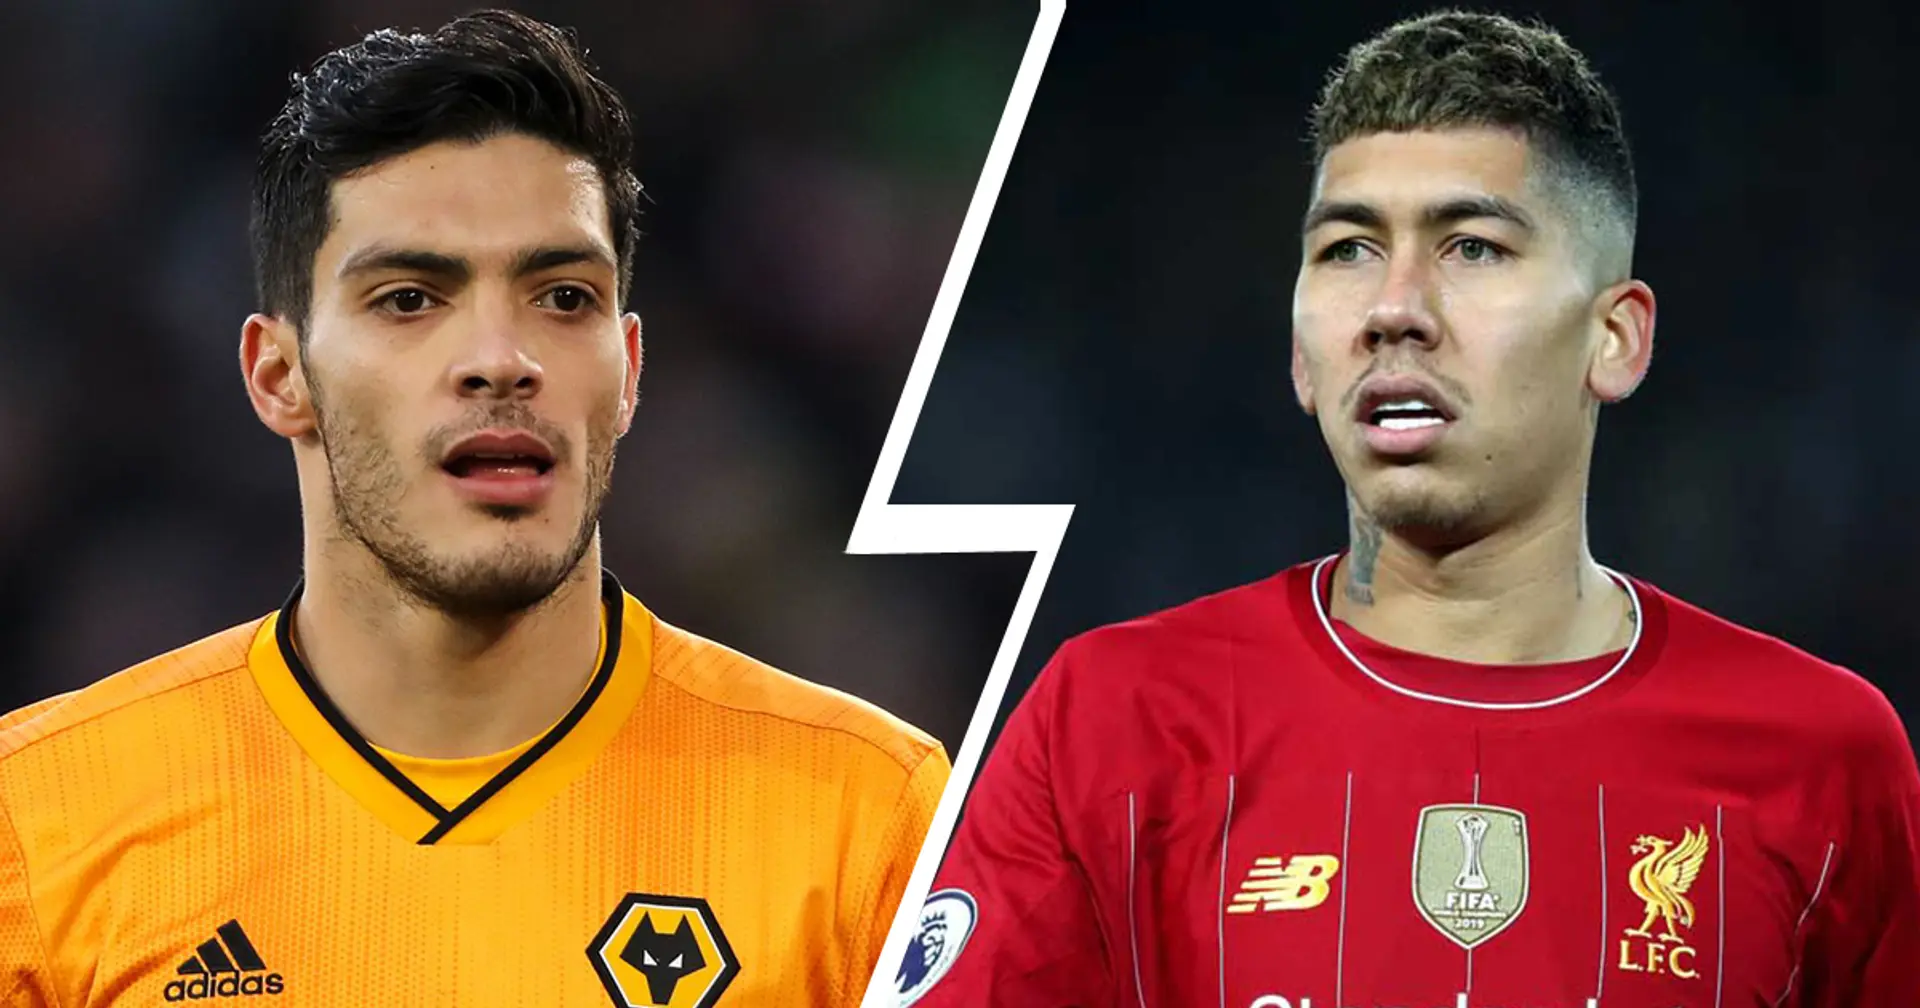 Wolves striker Jimenez follows Firmino and tries to be similar